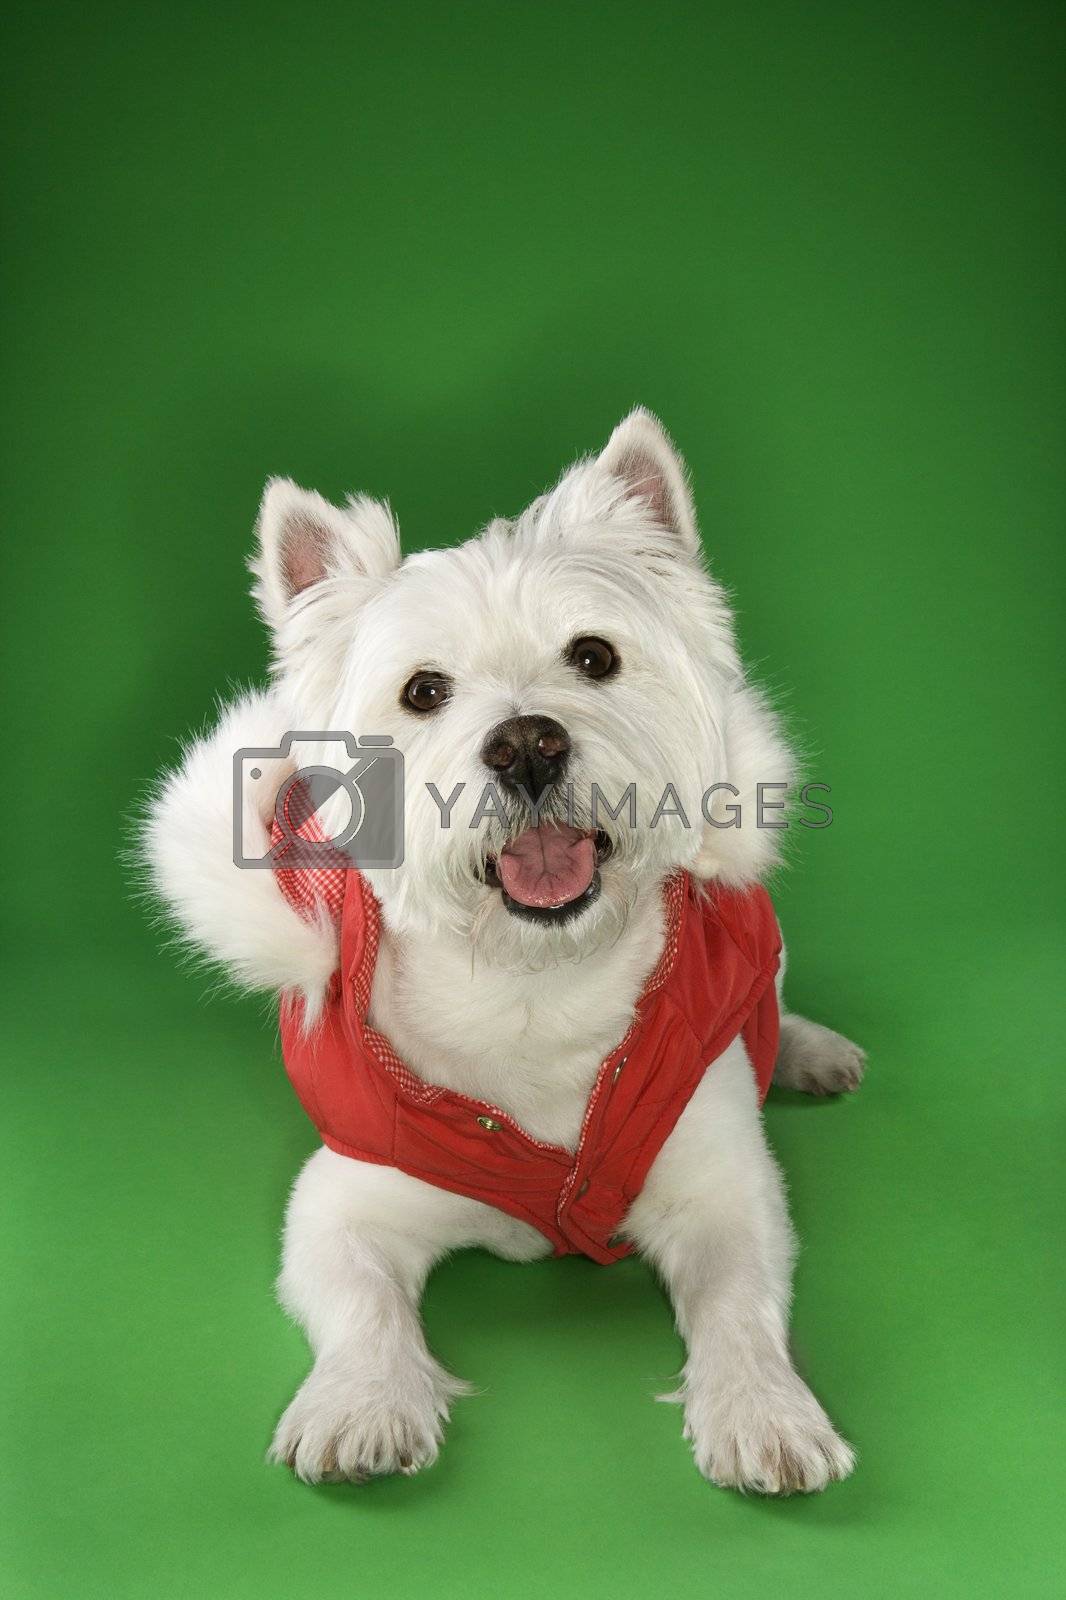 Royalty free image of White terrier dog wearing coat. by iofoto